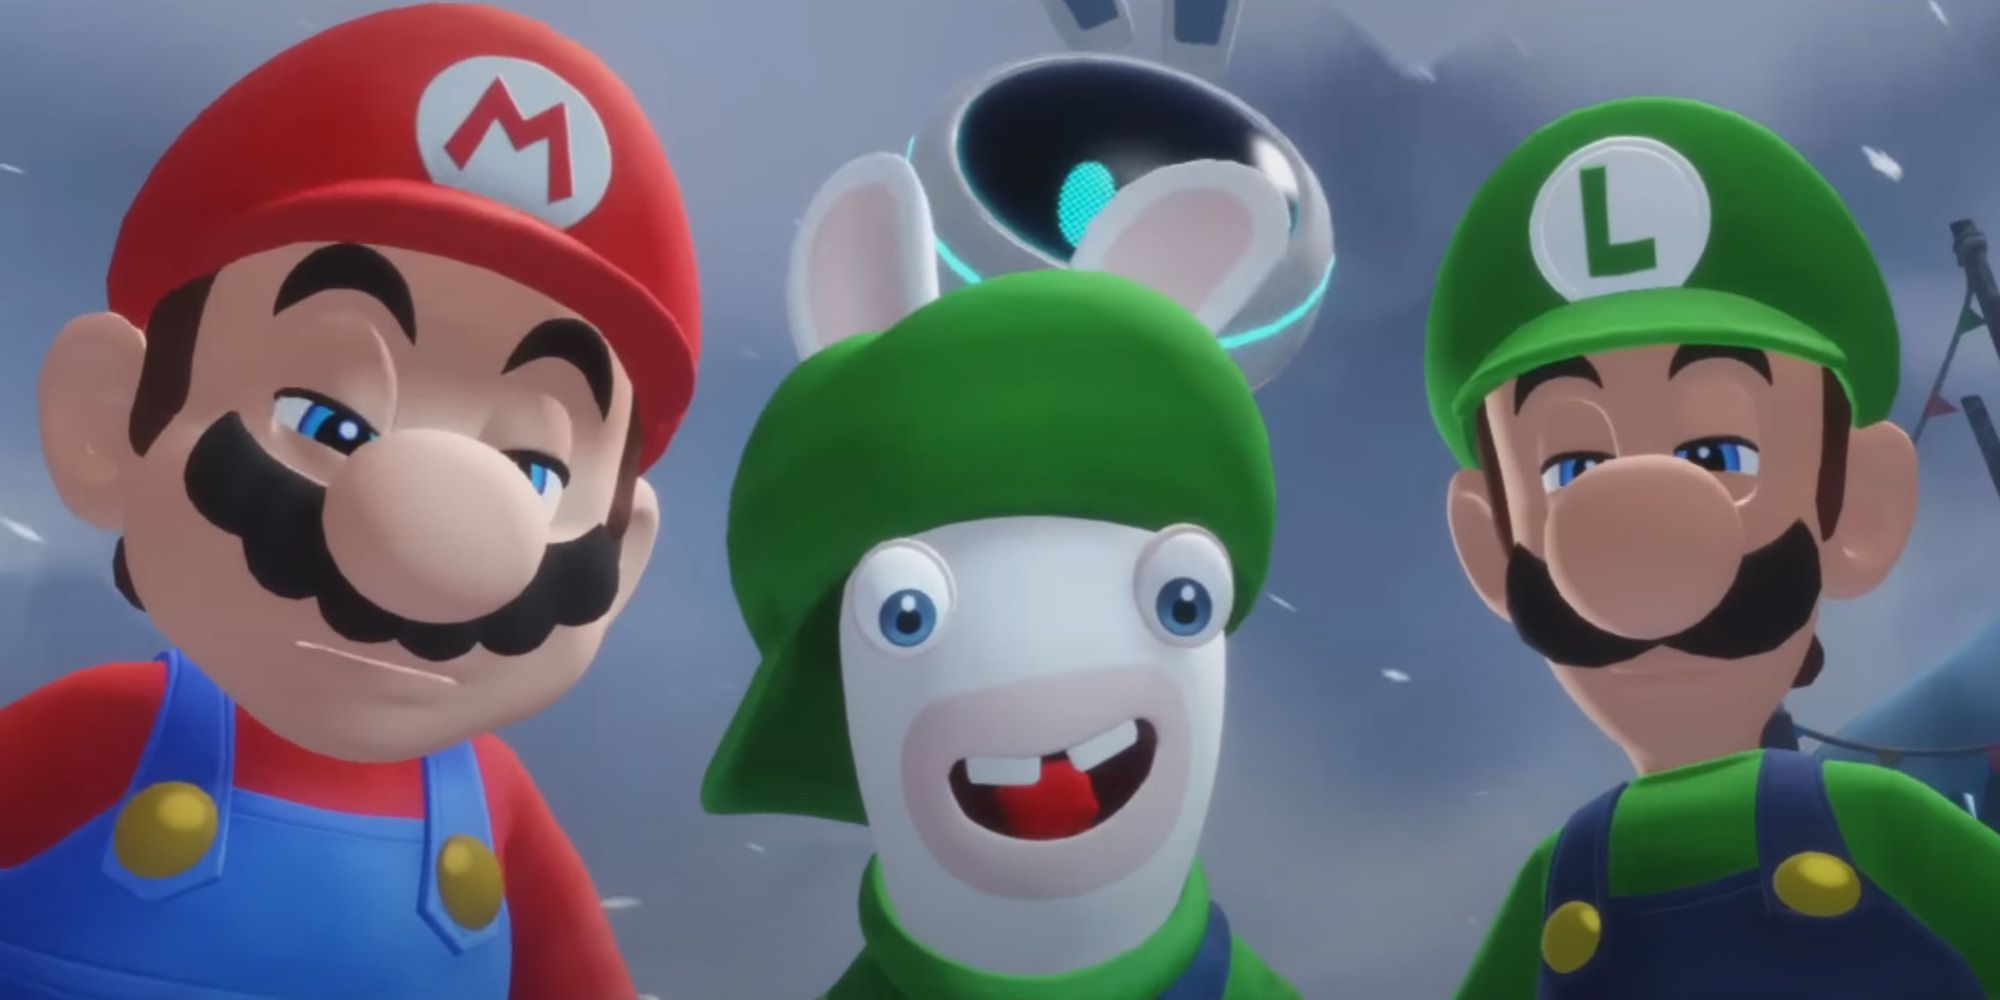 5 Best Sparks To Use in Mario + Rabbids: Sparks Of Hope